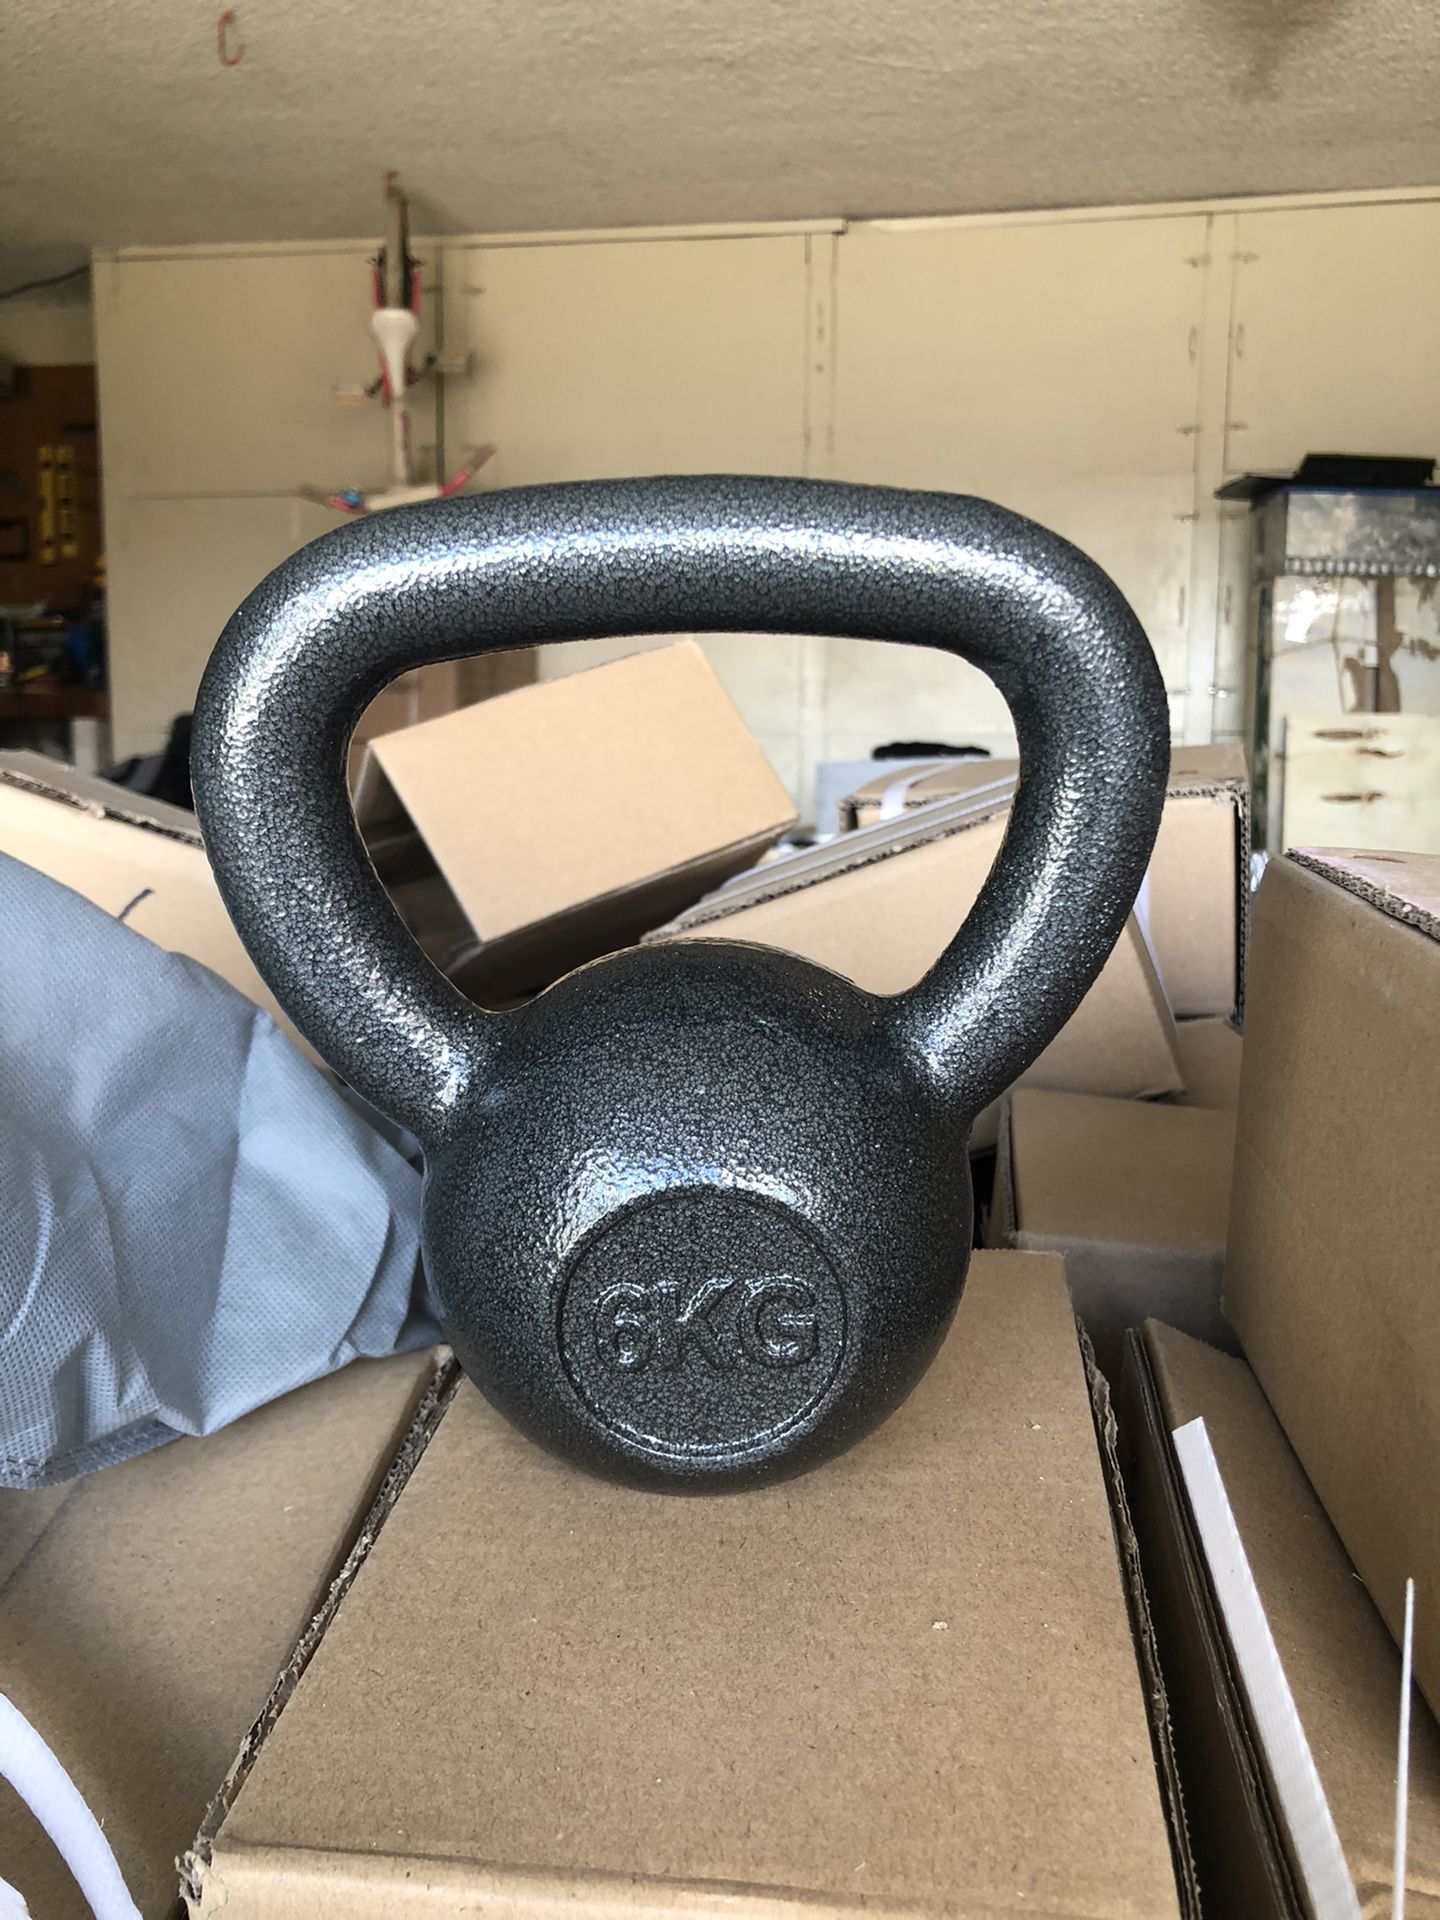 New 6kg Cast Iron Kettlebell Solid Steel Workout Home Gym